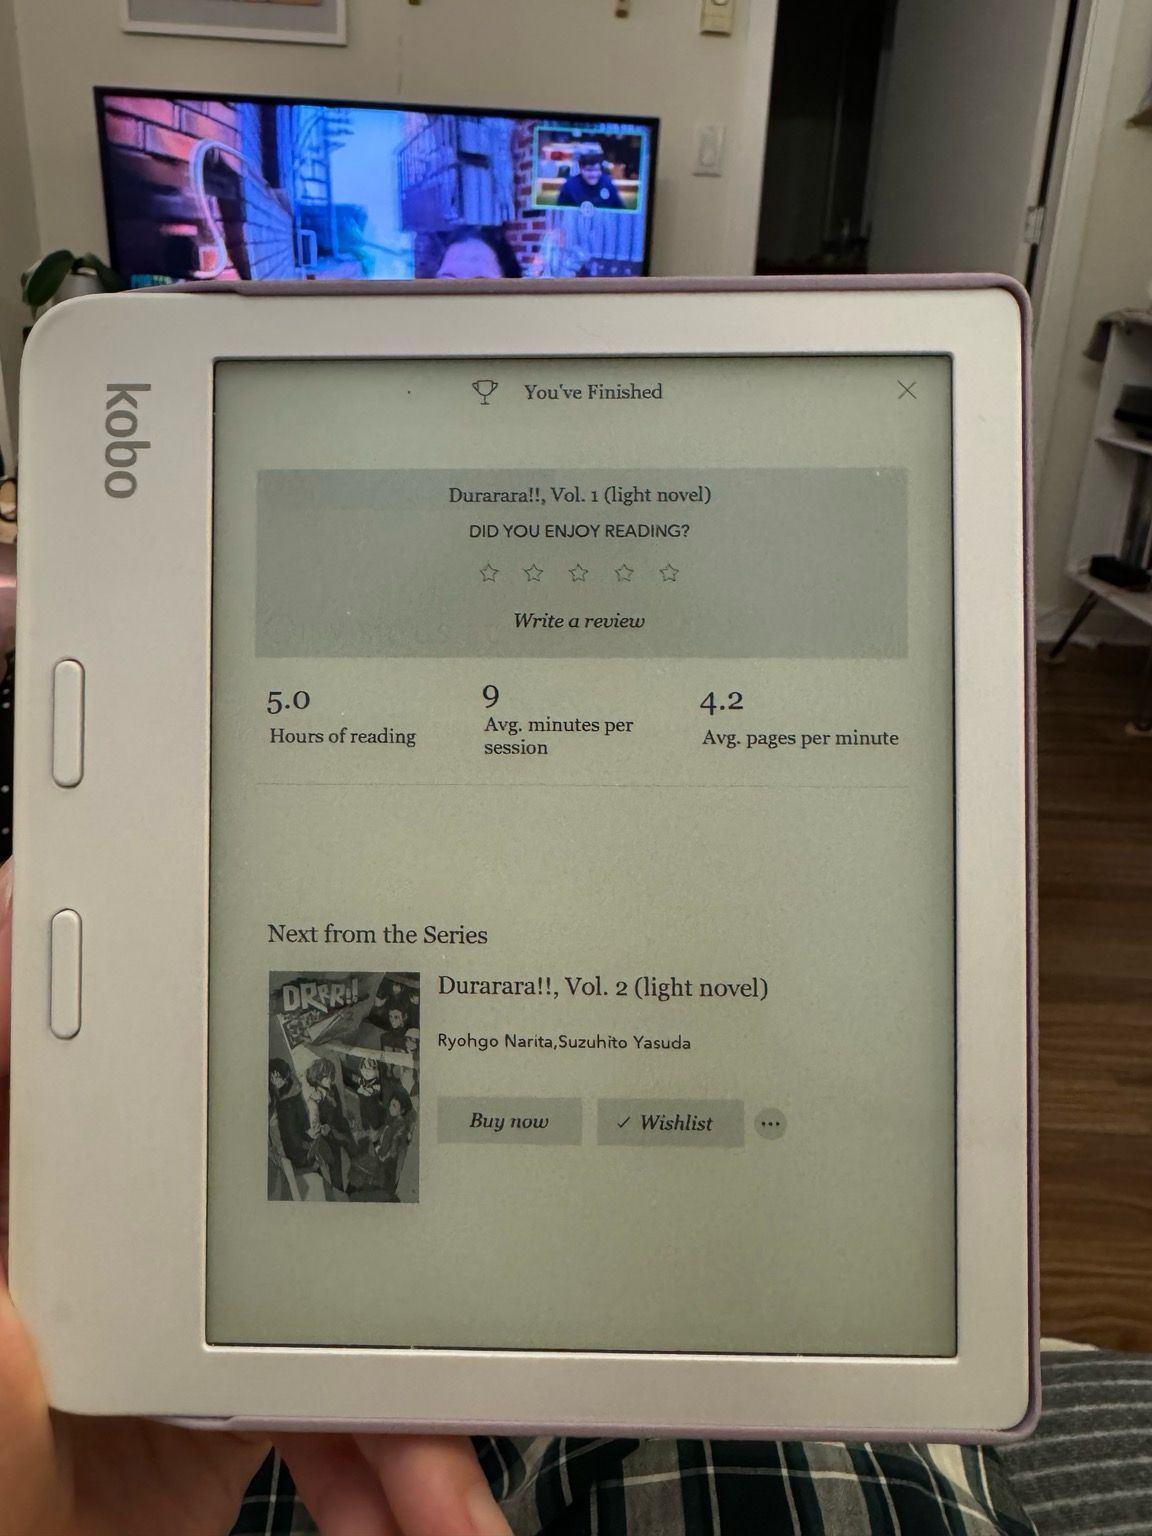 Photo of a Kobo reader, showing 5 hours of reading time, 9 minutes average per session and 4.2 pages per minute 